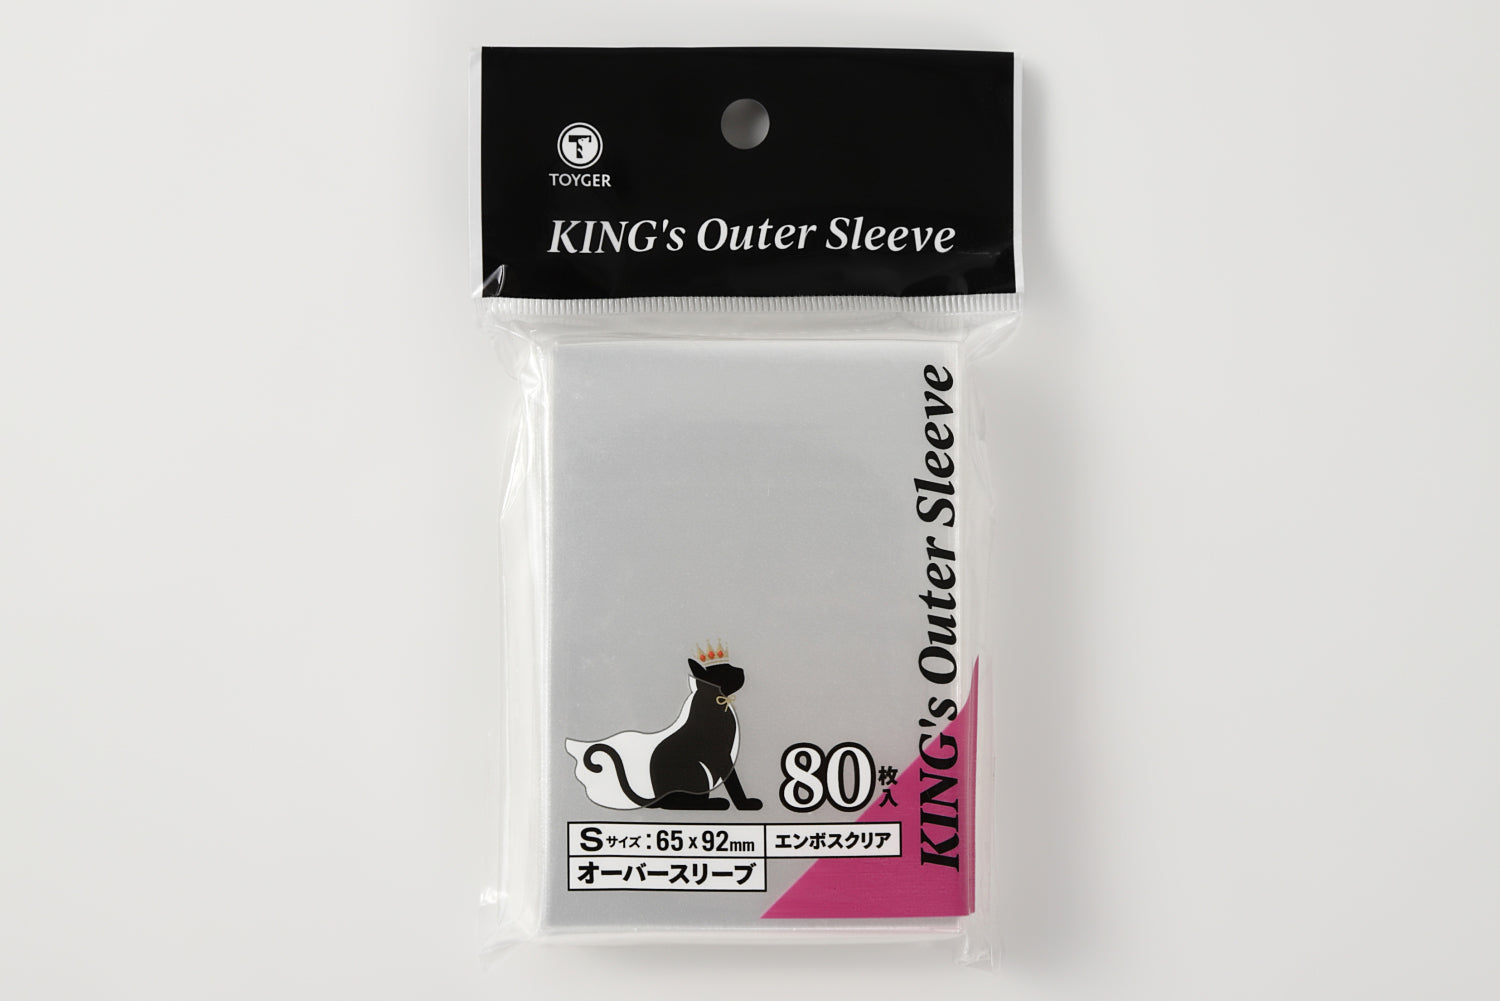 TOYGER KING's Outer Sleeve (clear card protector) – TOYGER 